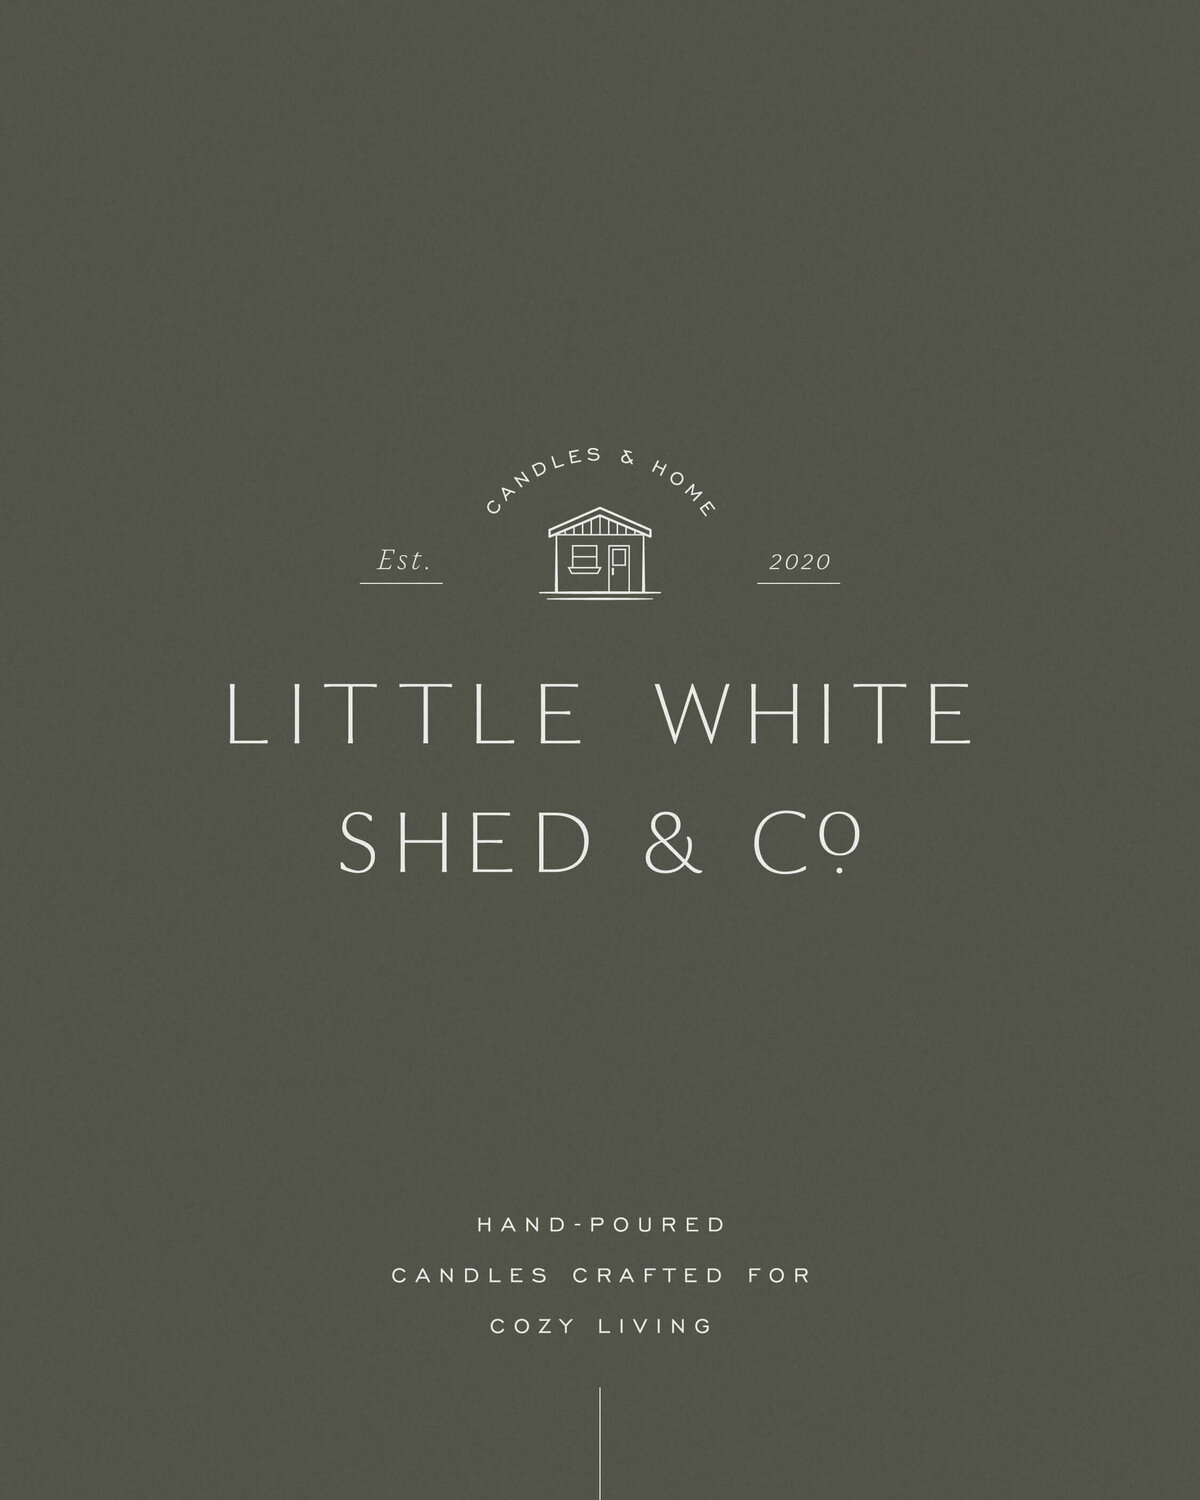 LittleWhiteShed&Co_LaunchGraphics-Instagram8